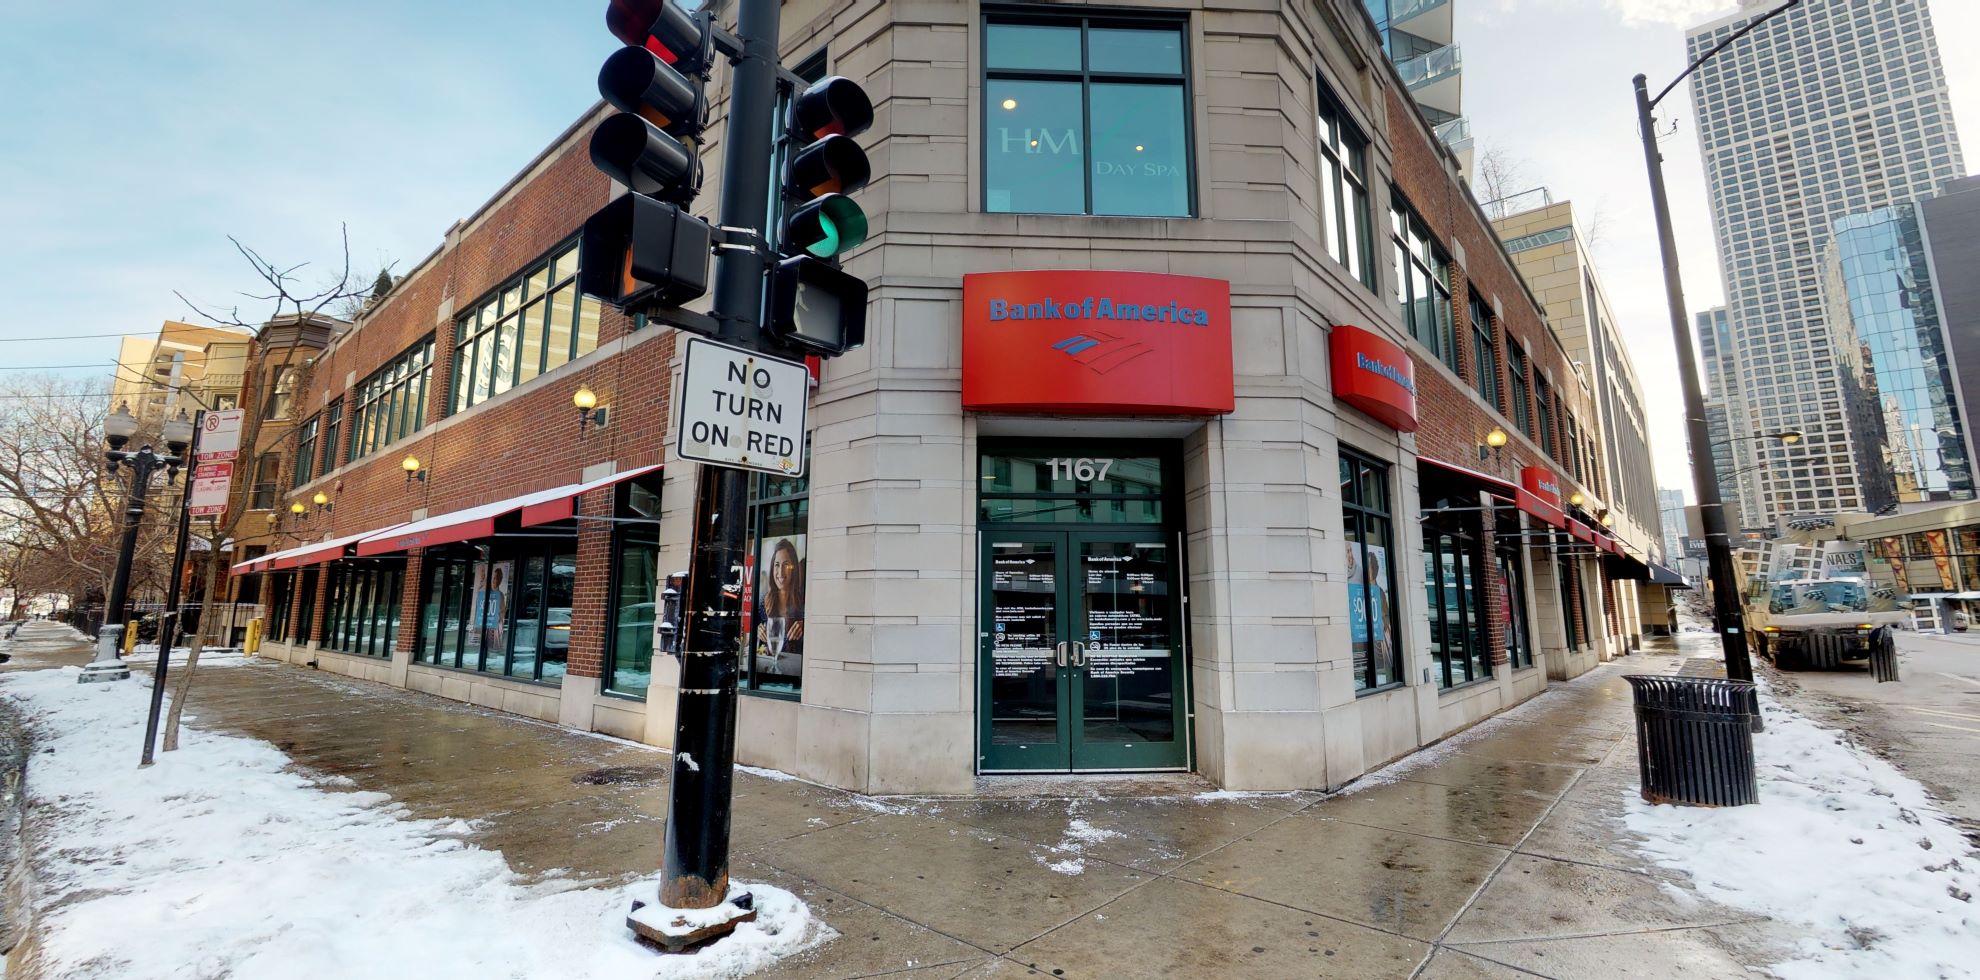 Bank of America financial center with walk-up ATM | 1167 N State St, Chicago, IL 60610